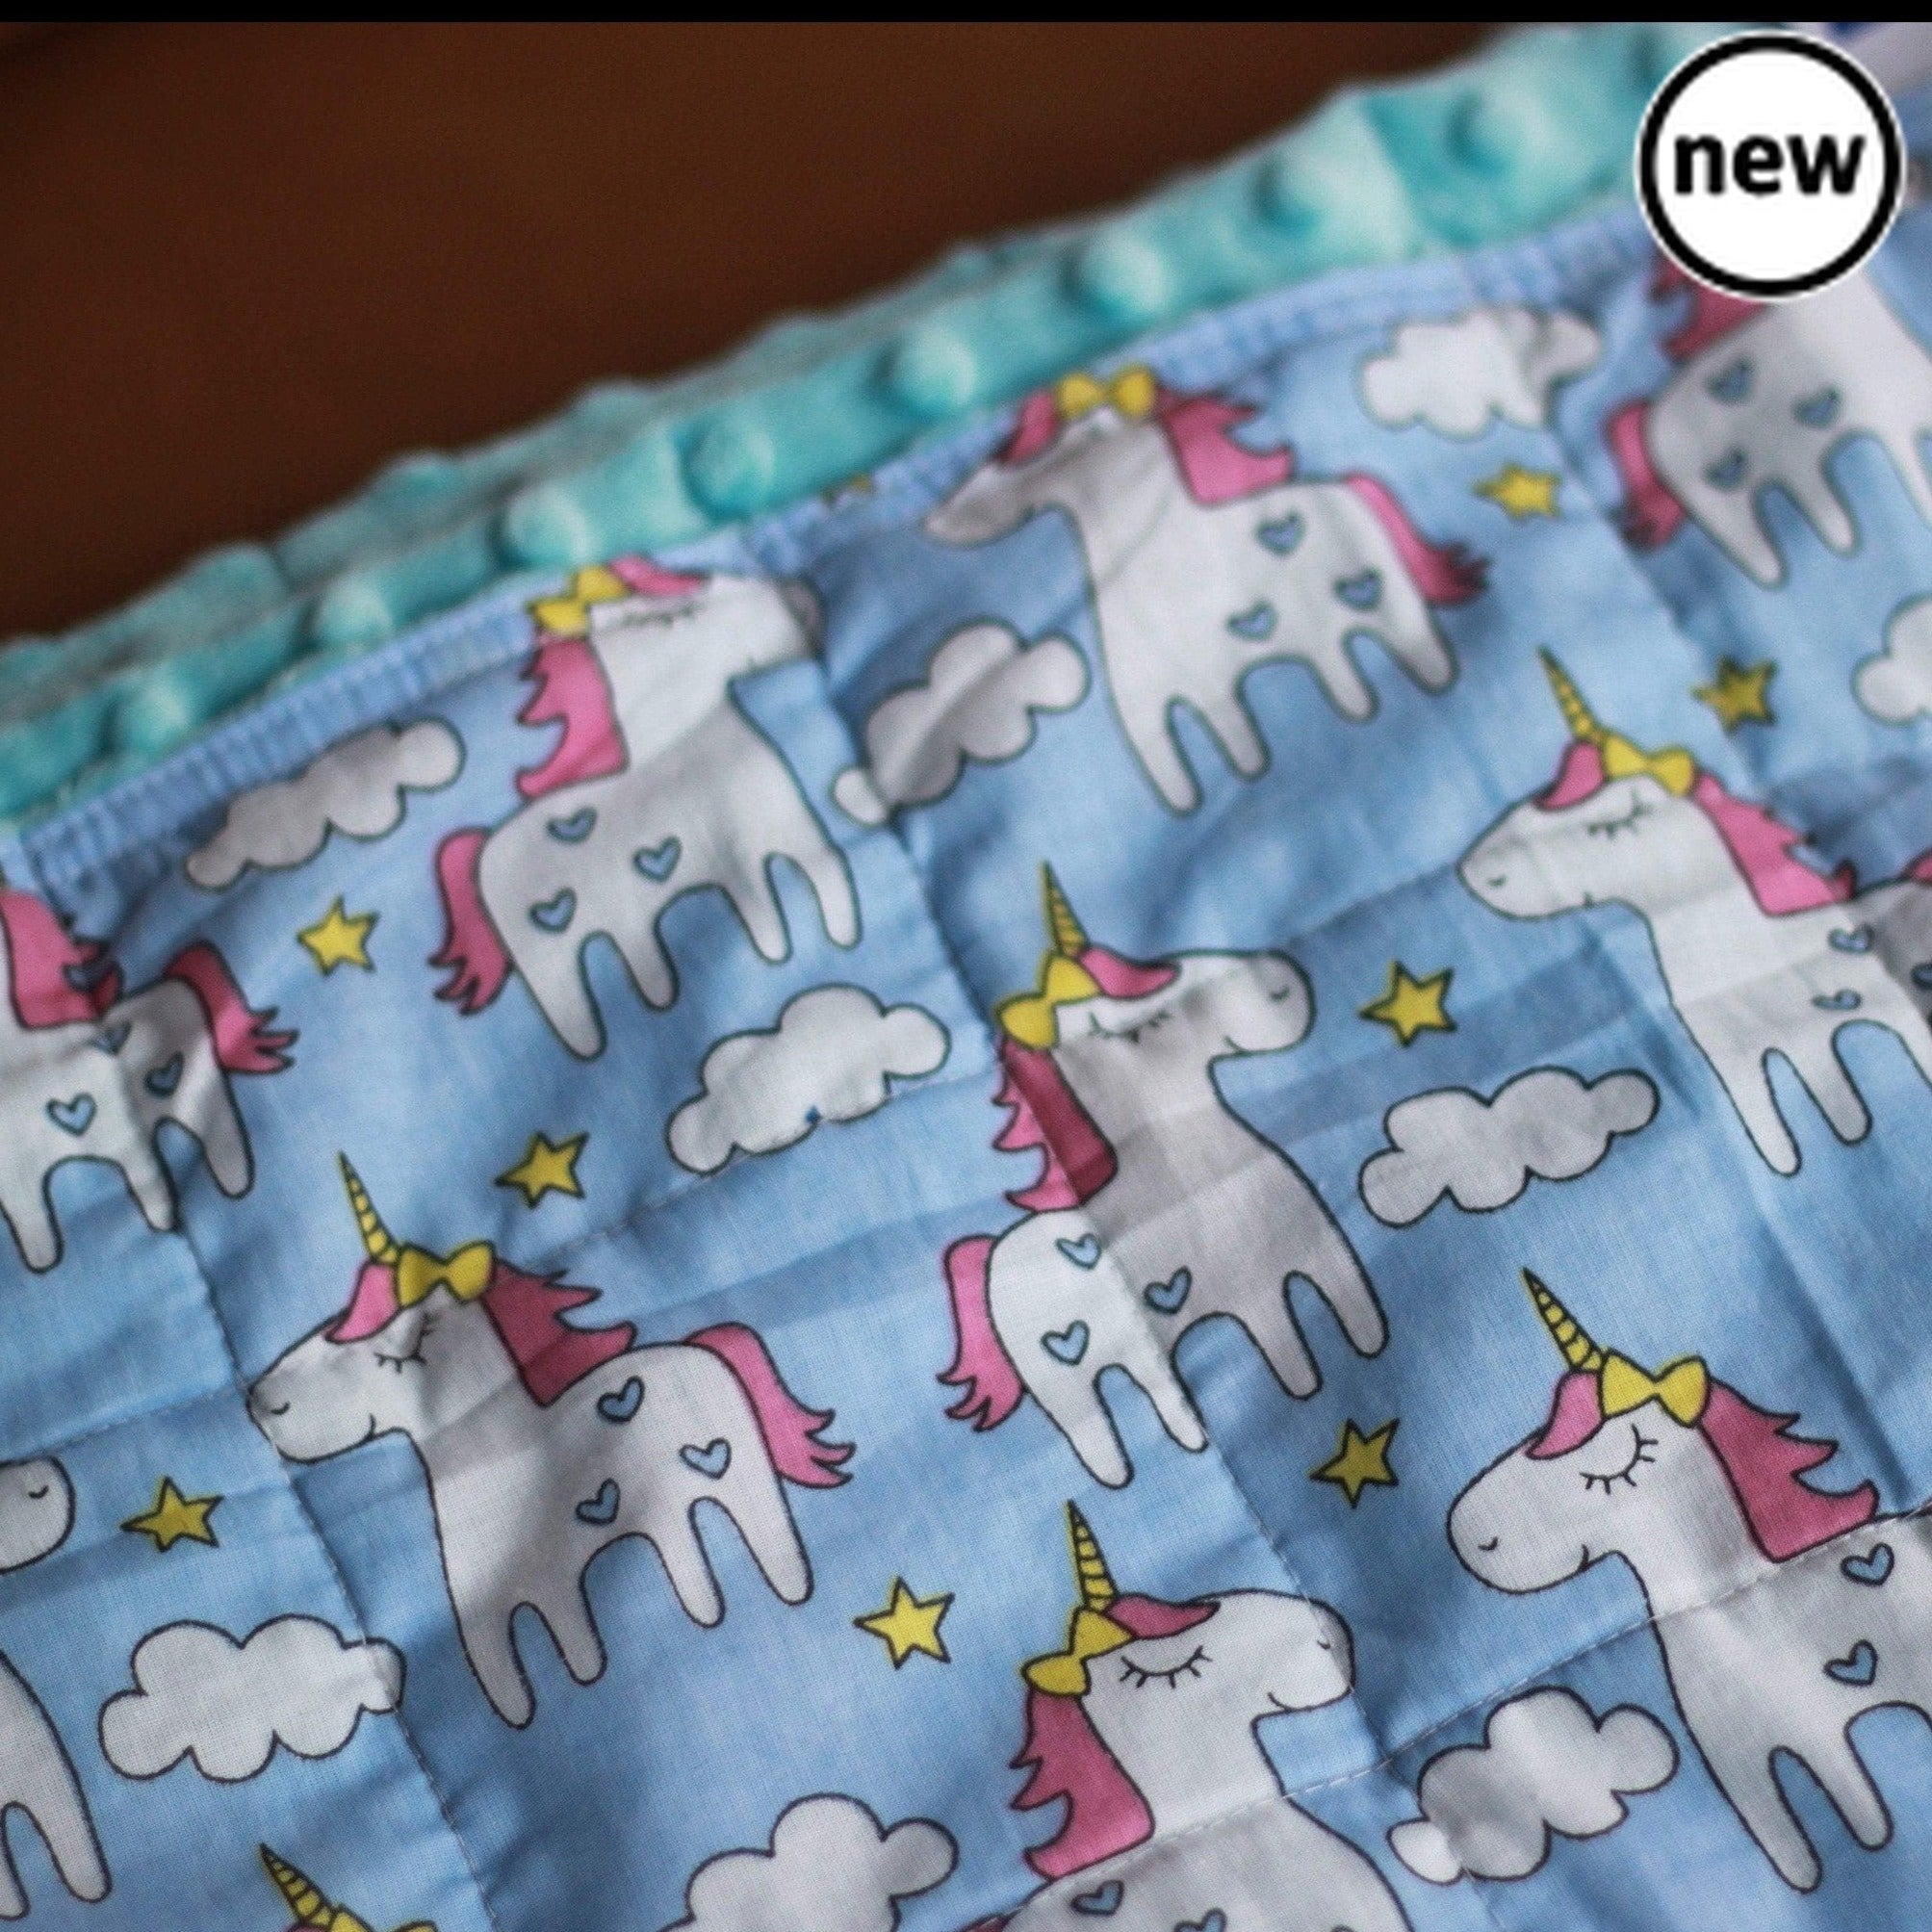 Unicorns Cotton Weighted Blanket, Introducing our Unicorns Cotton Weighted Blanket – a magical blend of comfort and individuality. Handmade from start to finish, this 100% unicorns cotton weighted blanket offers a personalized touch to meet your unique preferences. With customizable options for size, weight, filling, and backing fabric, it's your very own creation designed for all age groups. Key Features: Handmade Excellence: Immerse yourself in the enchanting world of unicorns with our entirely handmade w